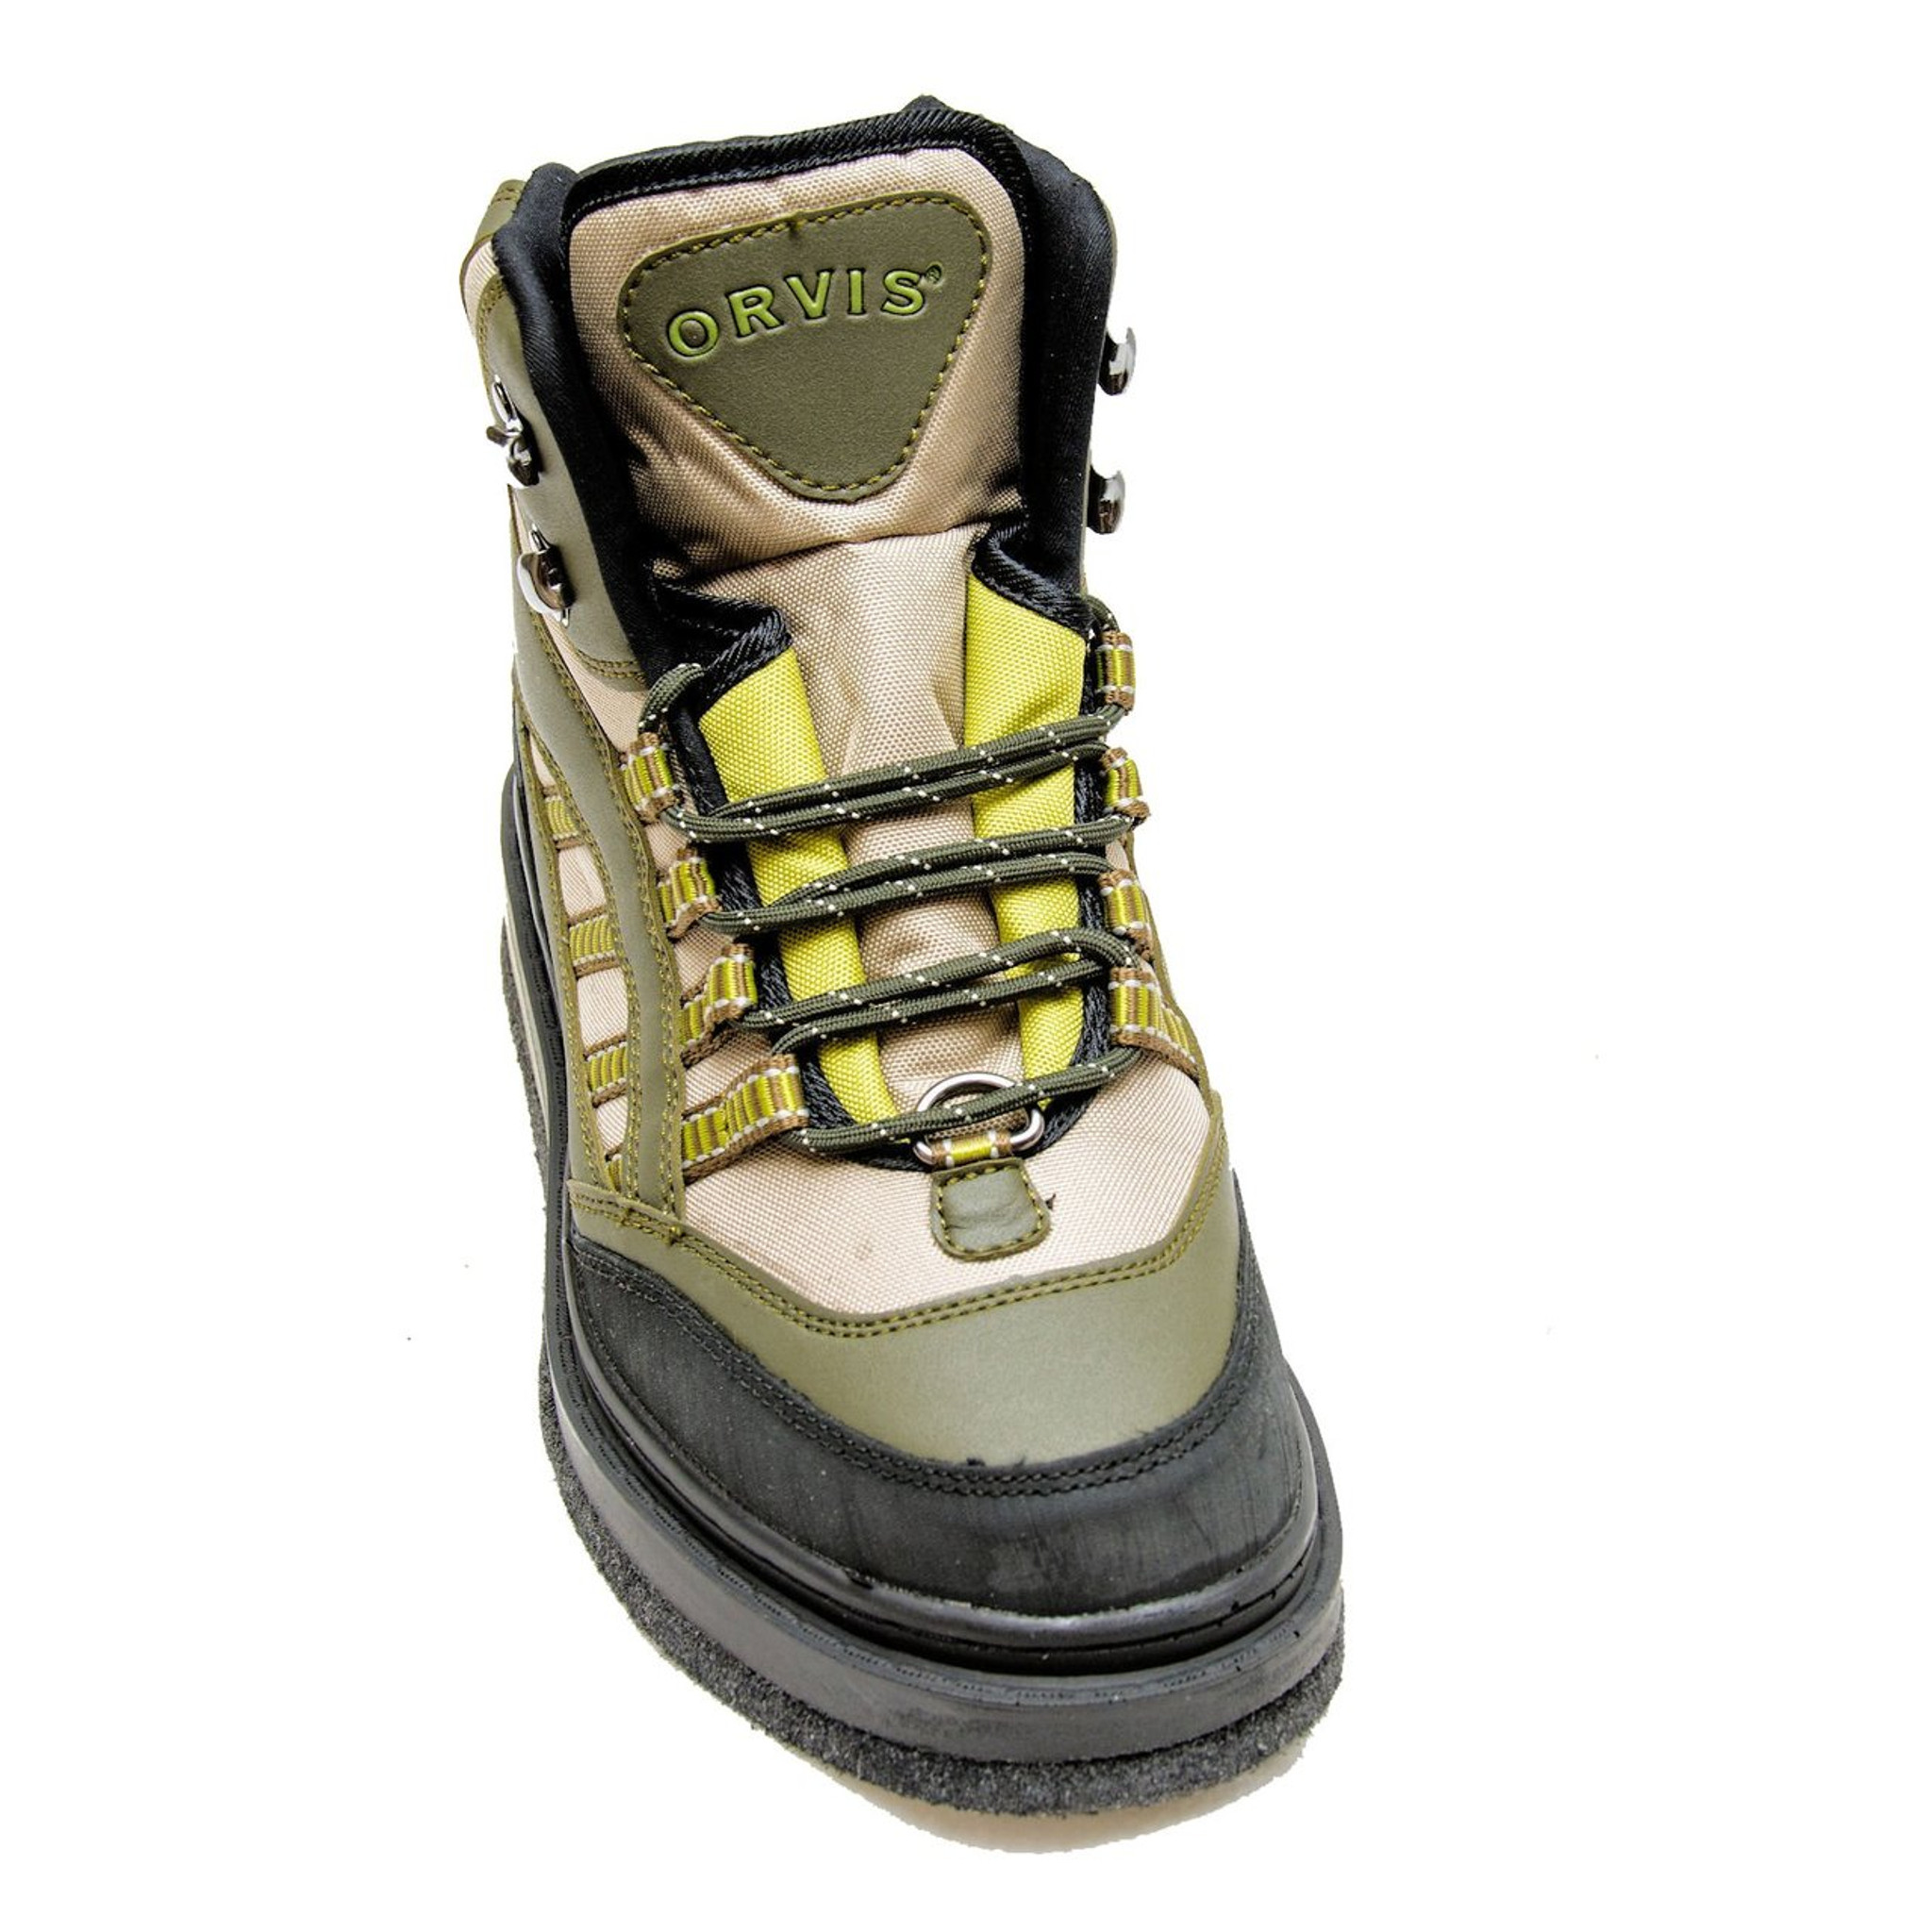 orvis encounter boots